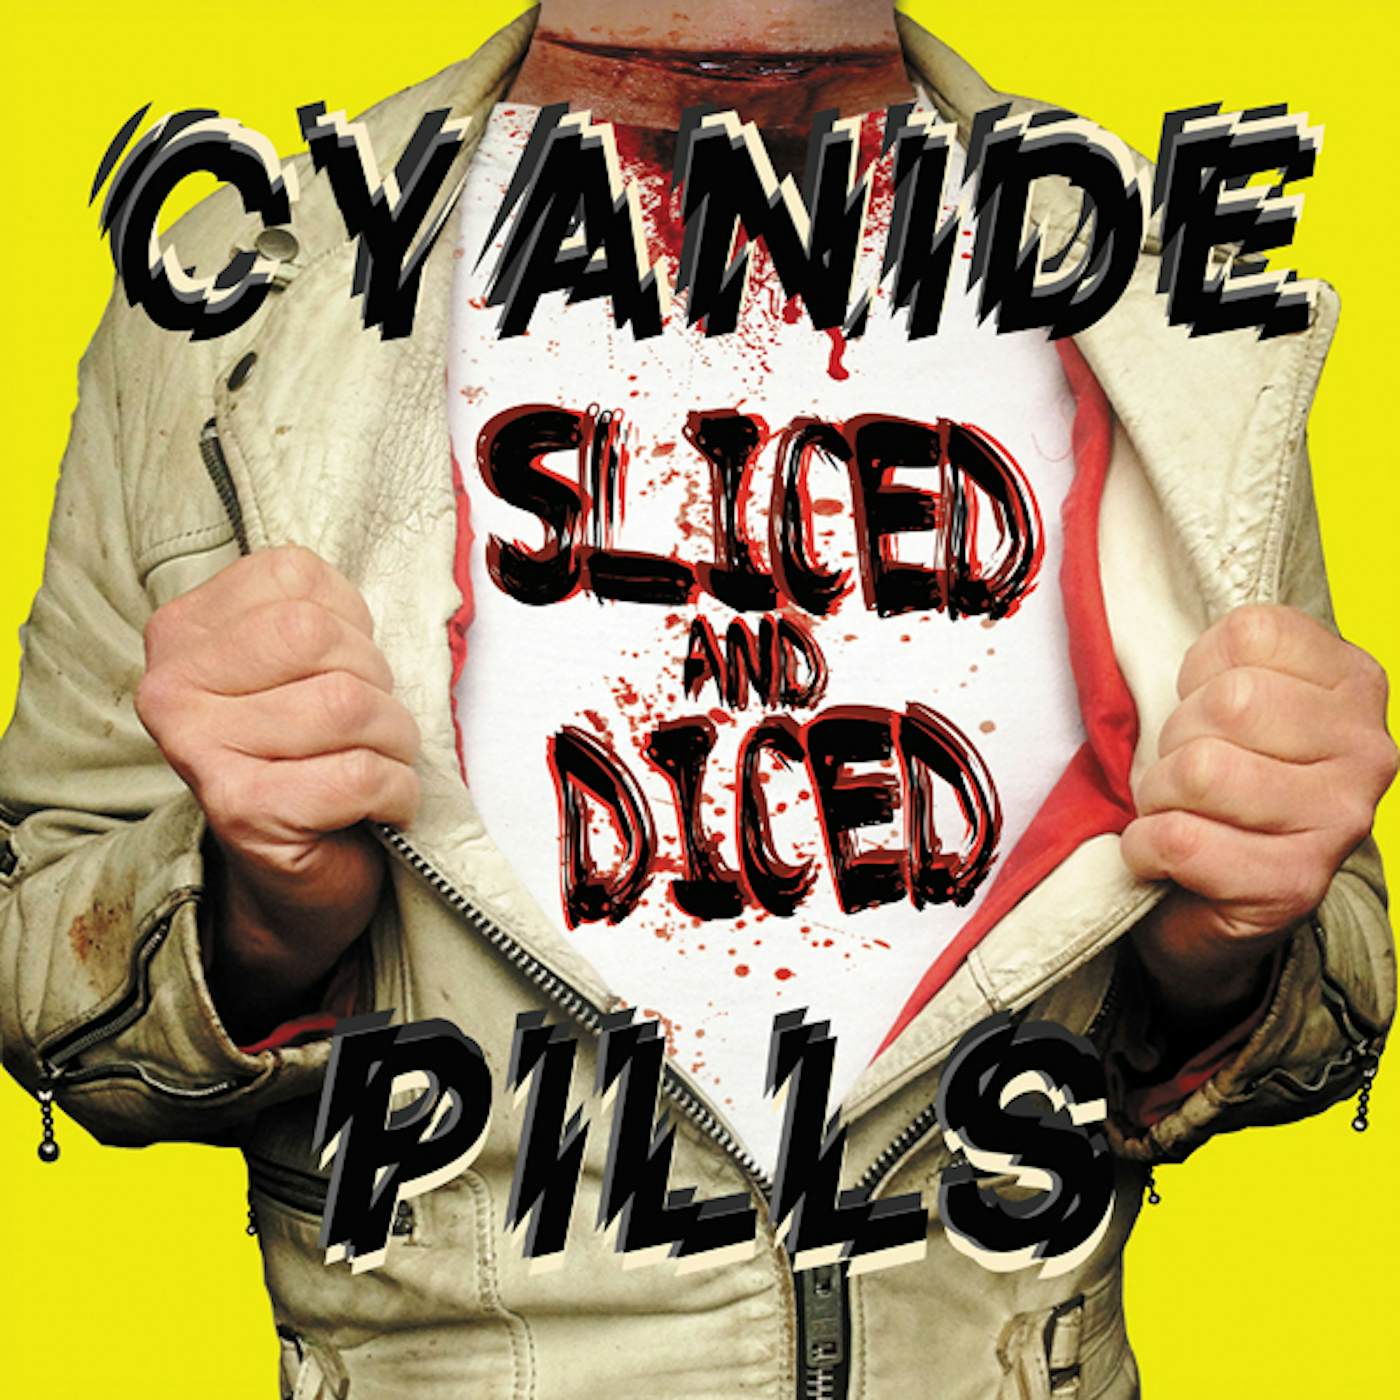 Cyanide Pills Sliced And Diced Vinyl Record